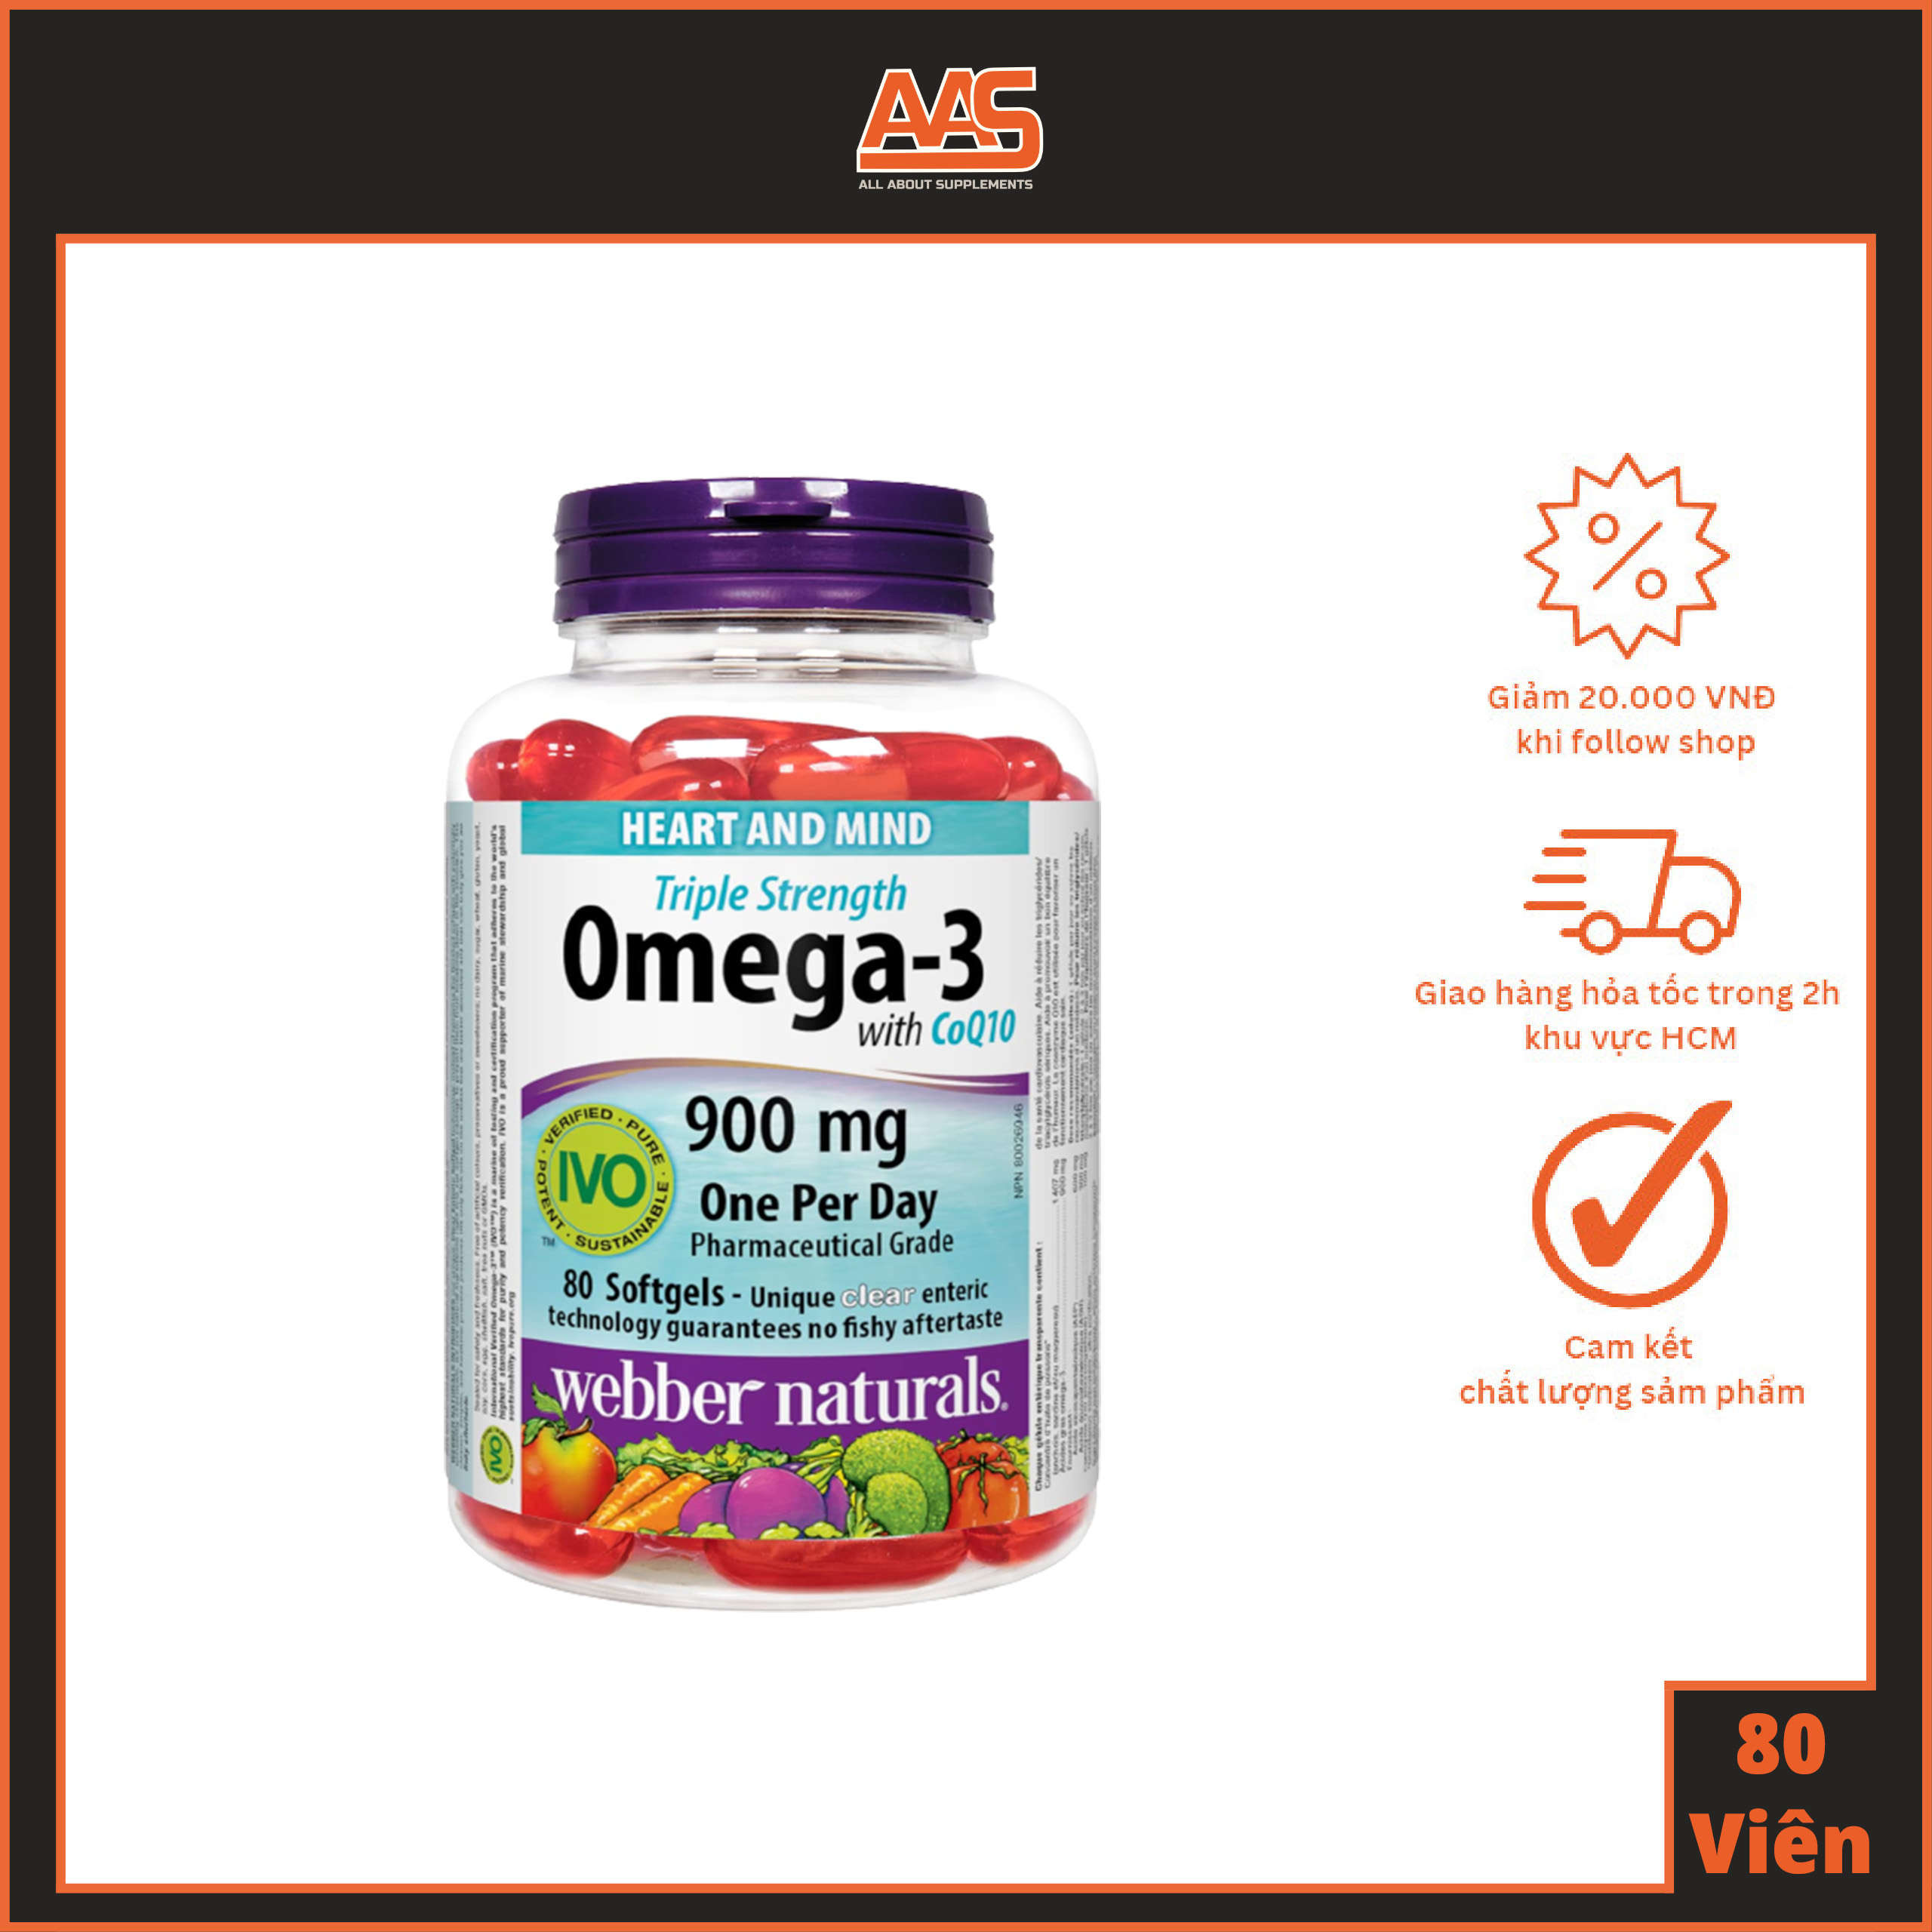 WEBBER NATURALS - OMEGA-3 with CoQ10